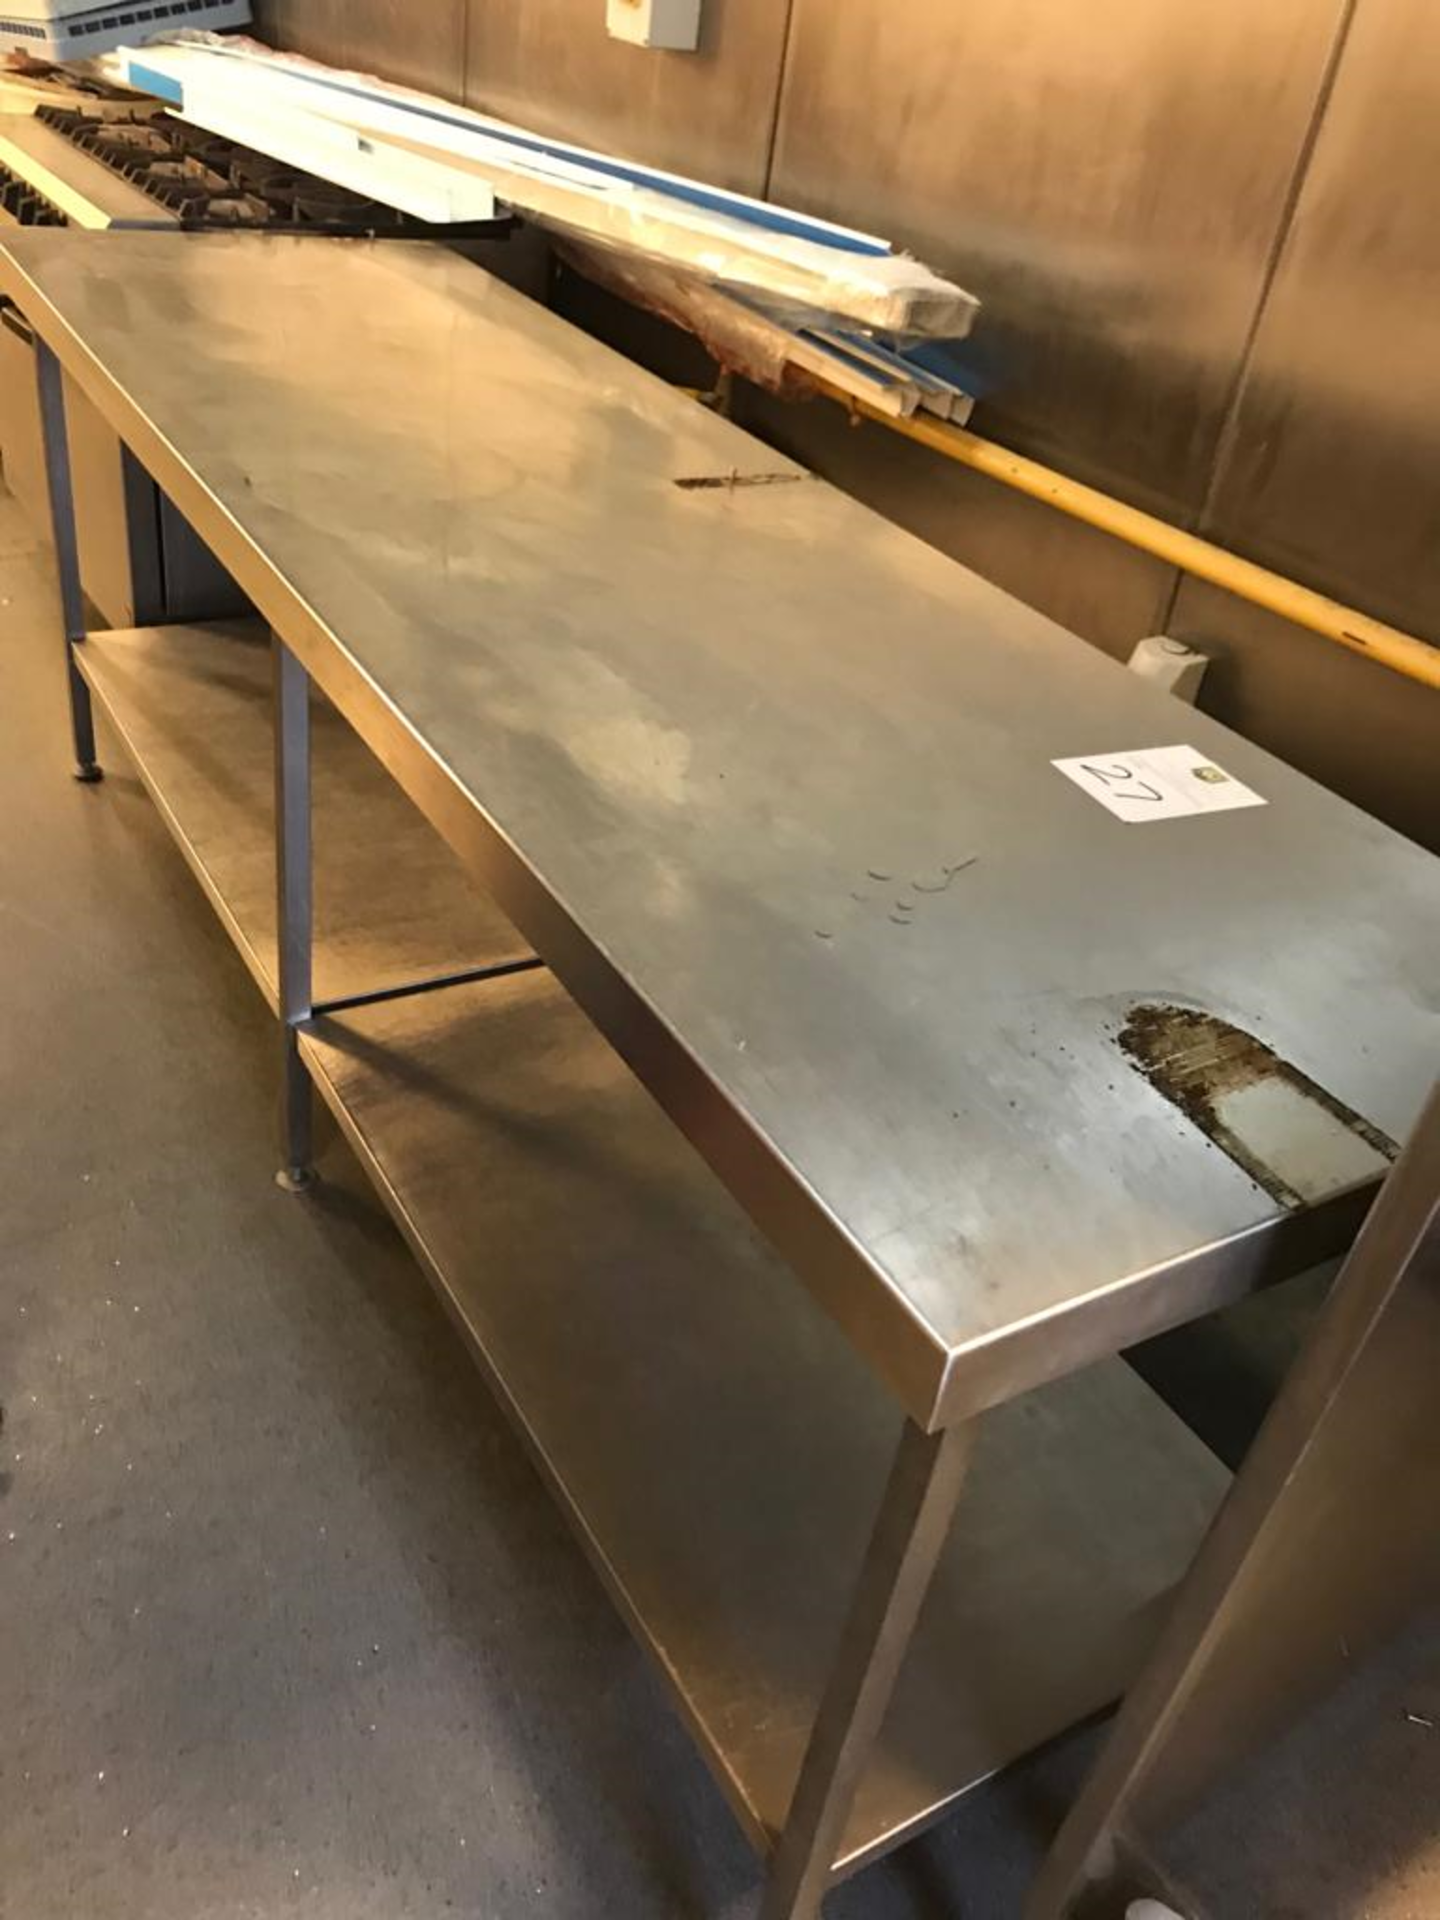 Stainless Steel Counter With Shelf Below - Image 5 of 6